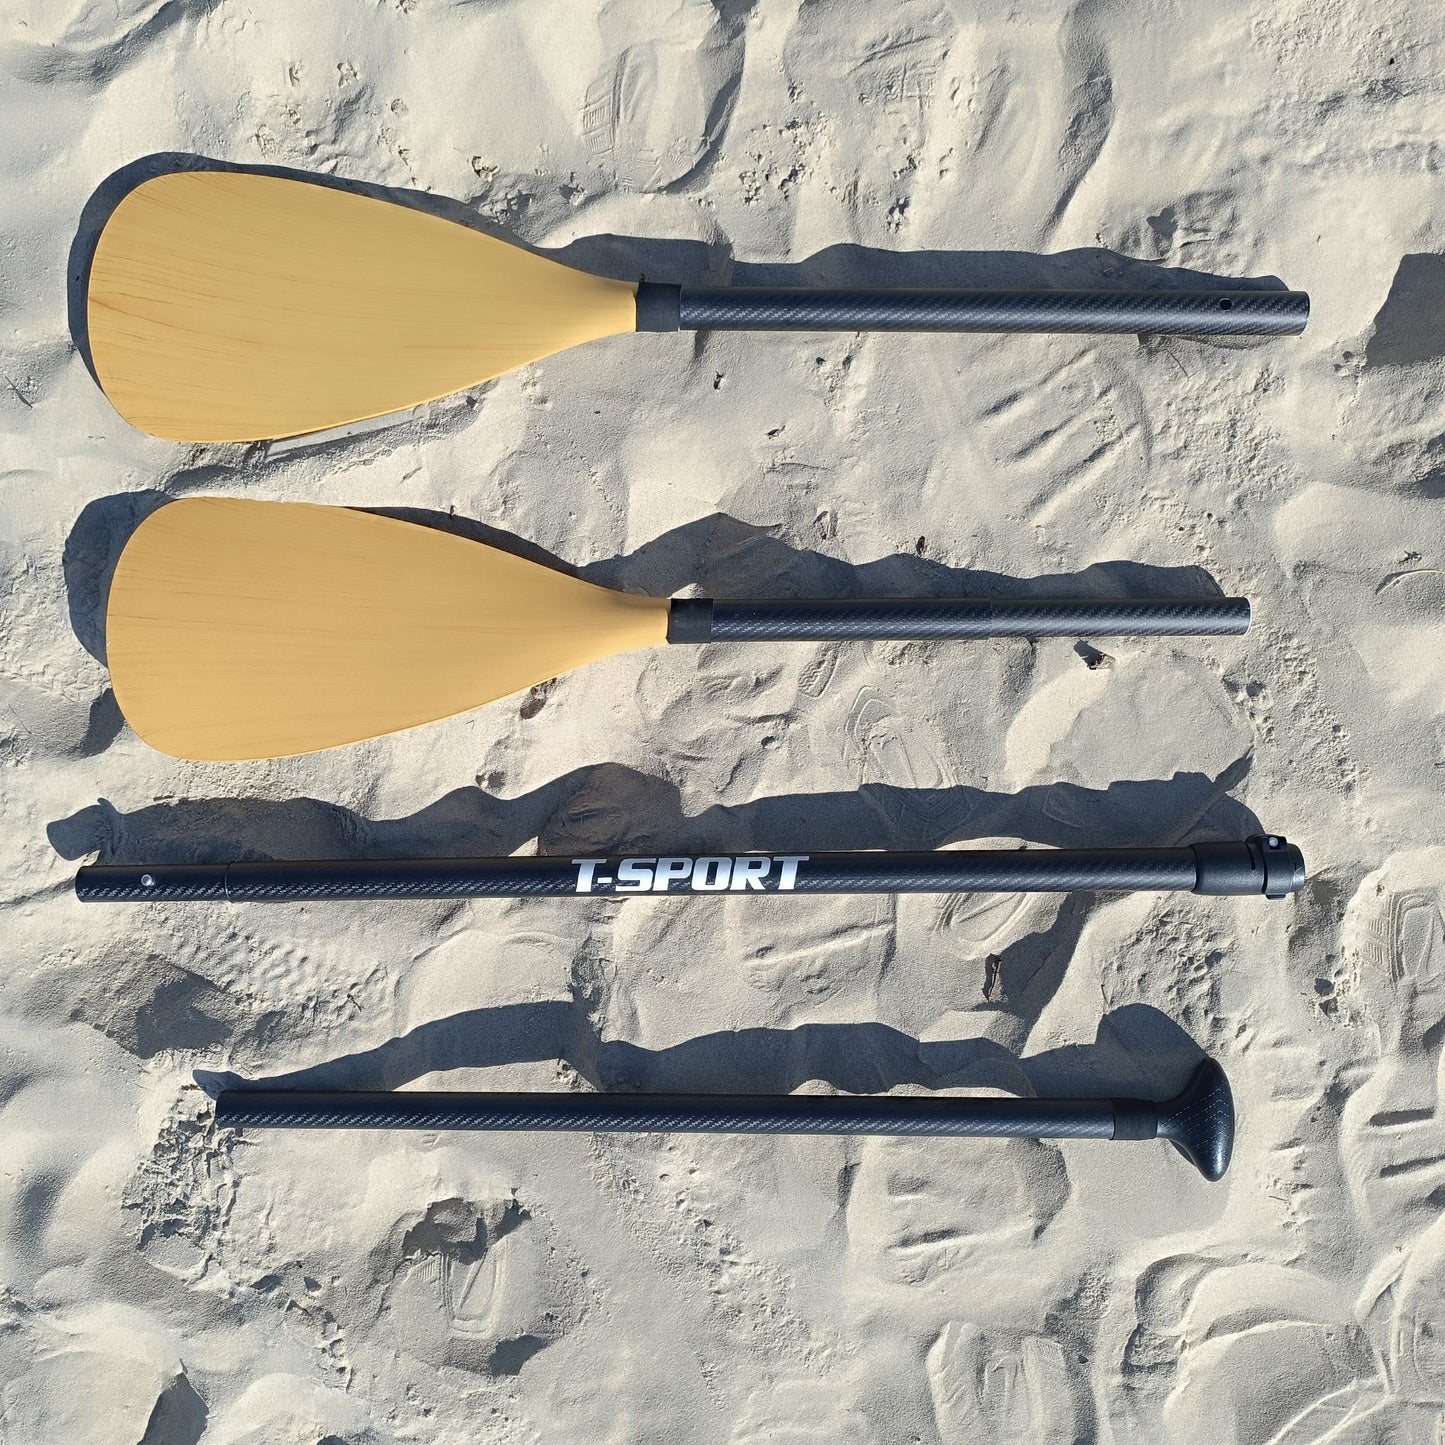 Explorer 2, 12' Paddle Board with Carbon Paddle and Full Accessories Kit